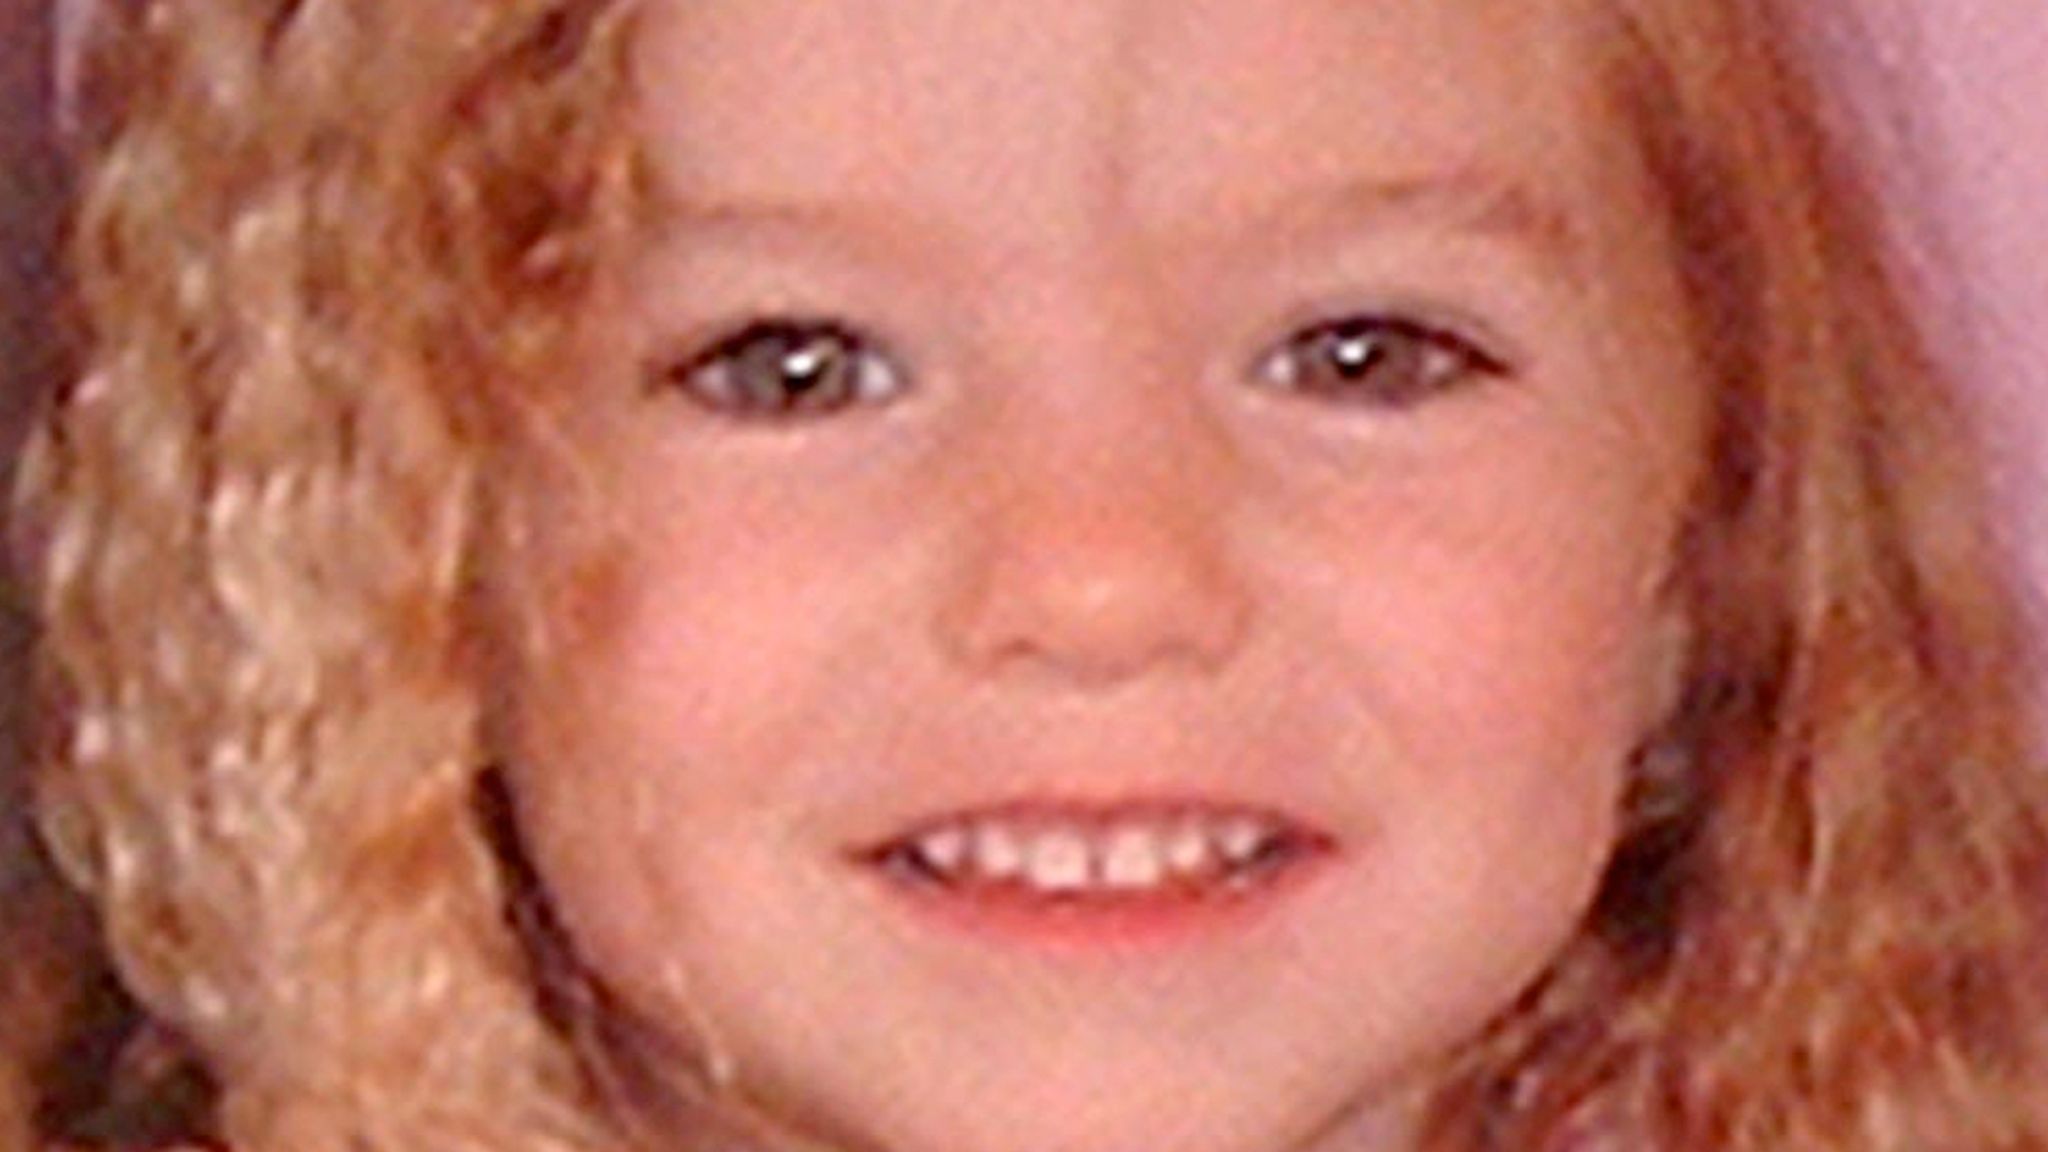 Madeleine McCann: Prosecutor's letter to parents says there is